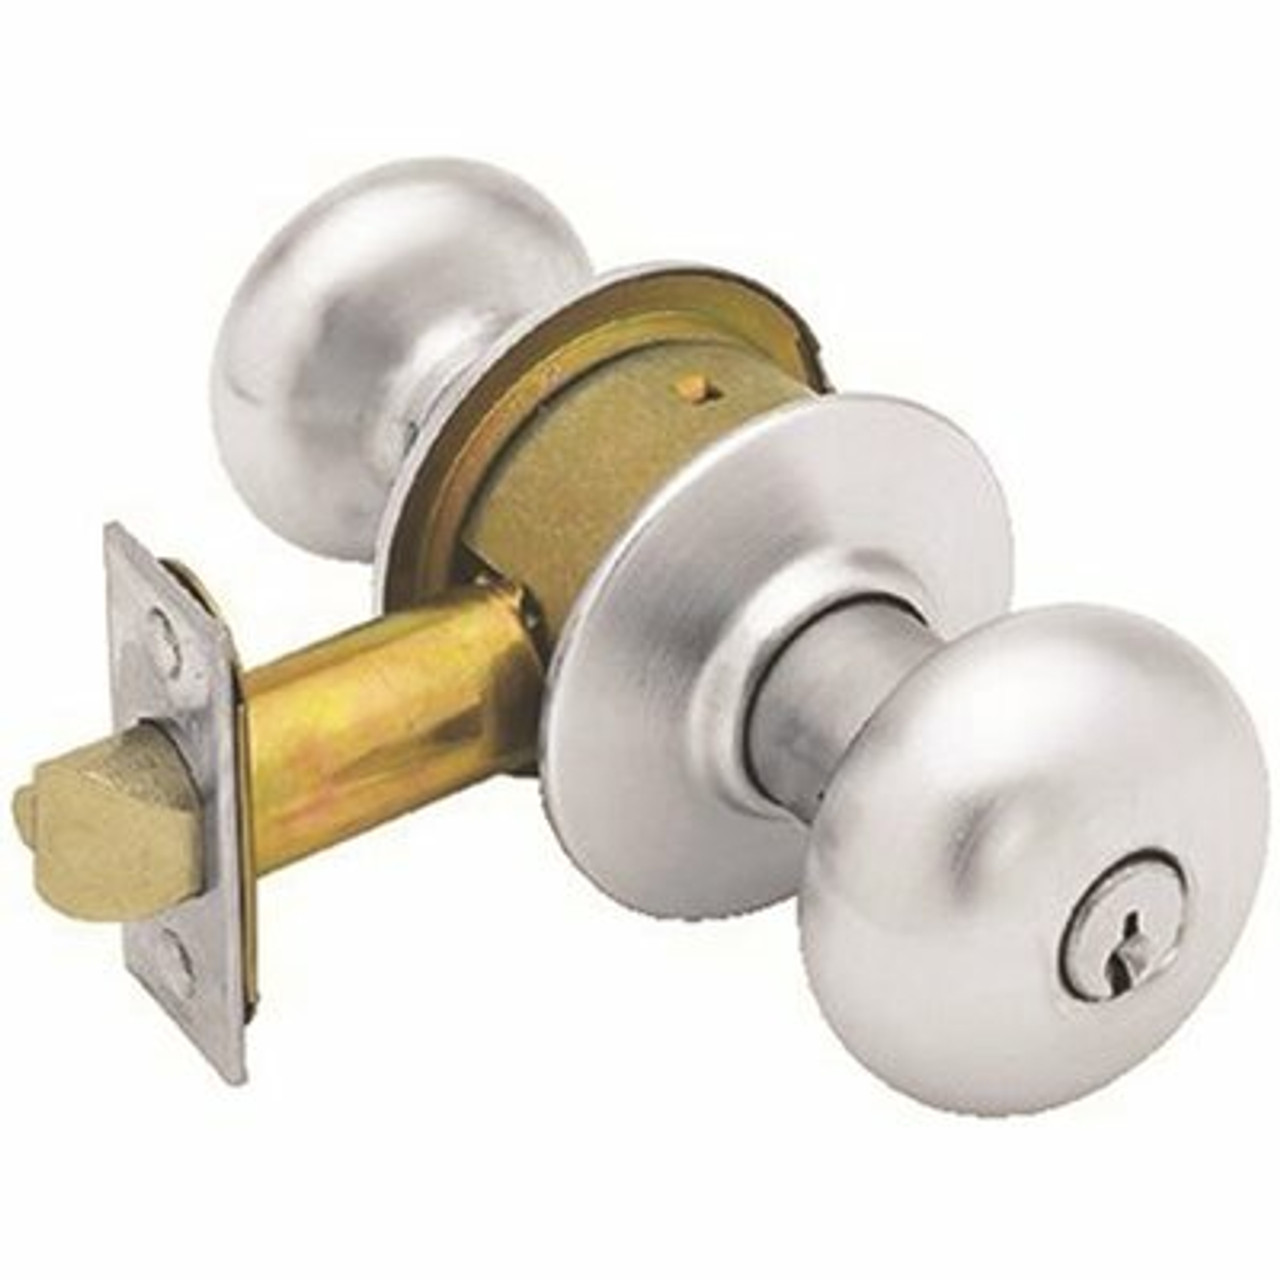 Schlage Classroom Plymouth 2-3/8 in. Chrome Bed/Bath Privacy Door Knob Lockset